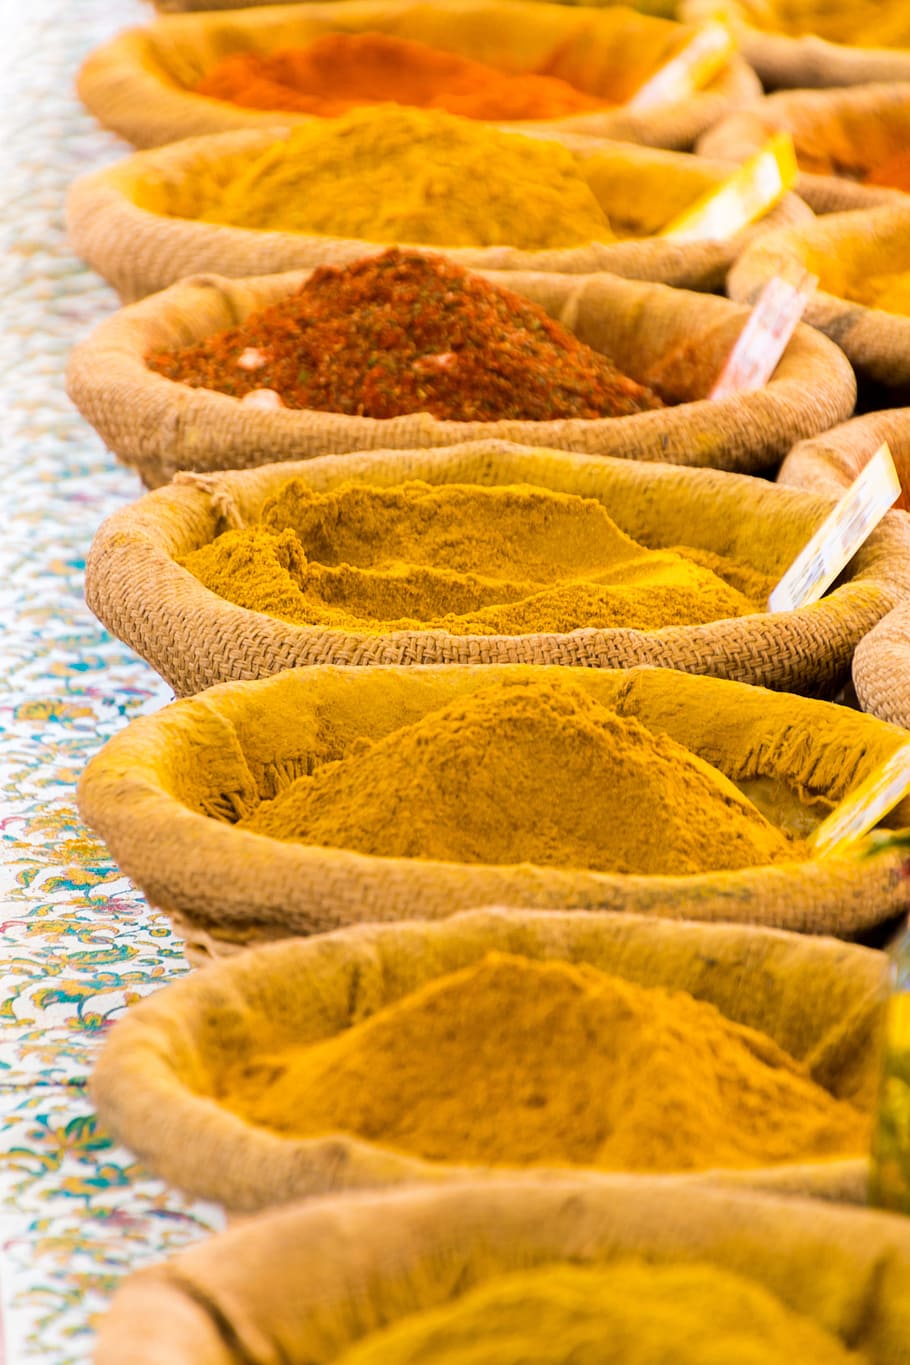 assorted, spices, brown, packs, curry, market stall, colorful, paprika, market, pepper